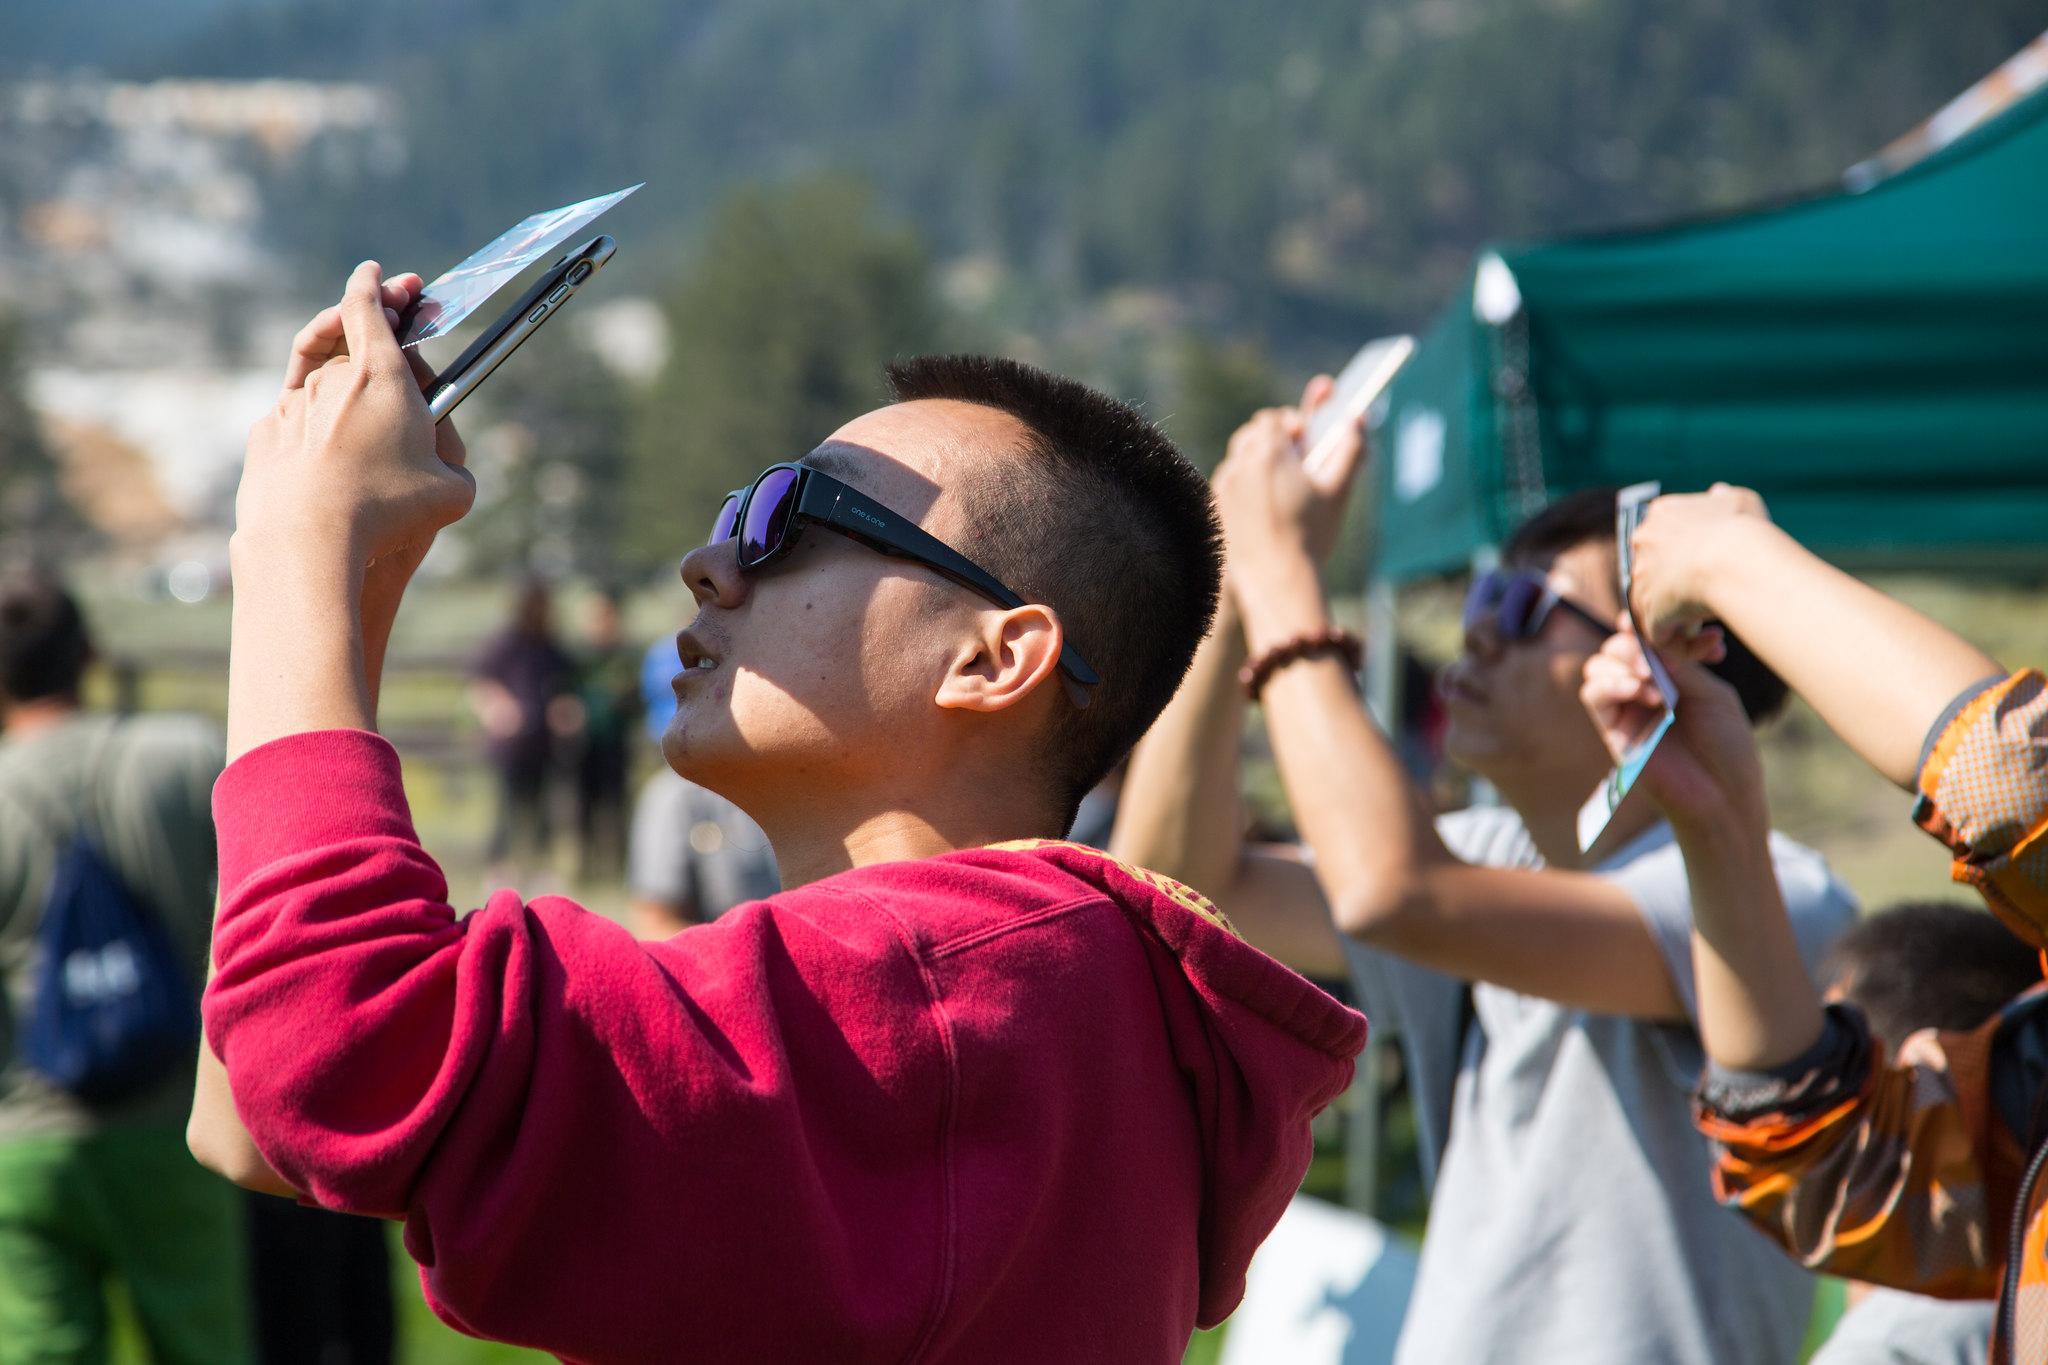 Don't forget: Smartphone cameras need eclipse filters too. (National Park Service / Flickr Creative Commons)